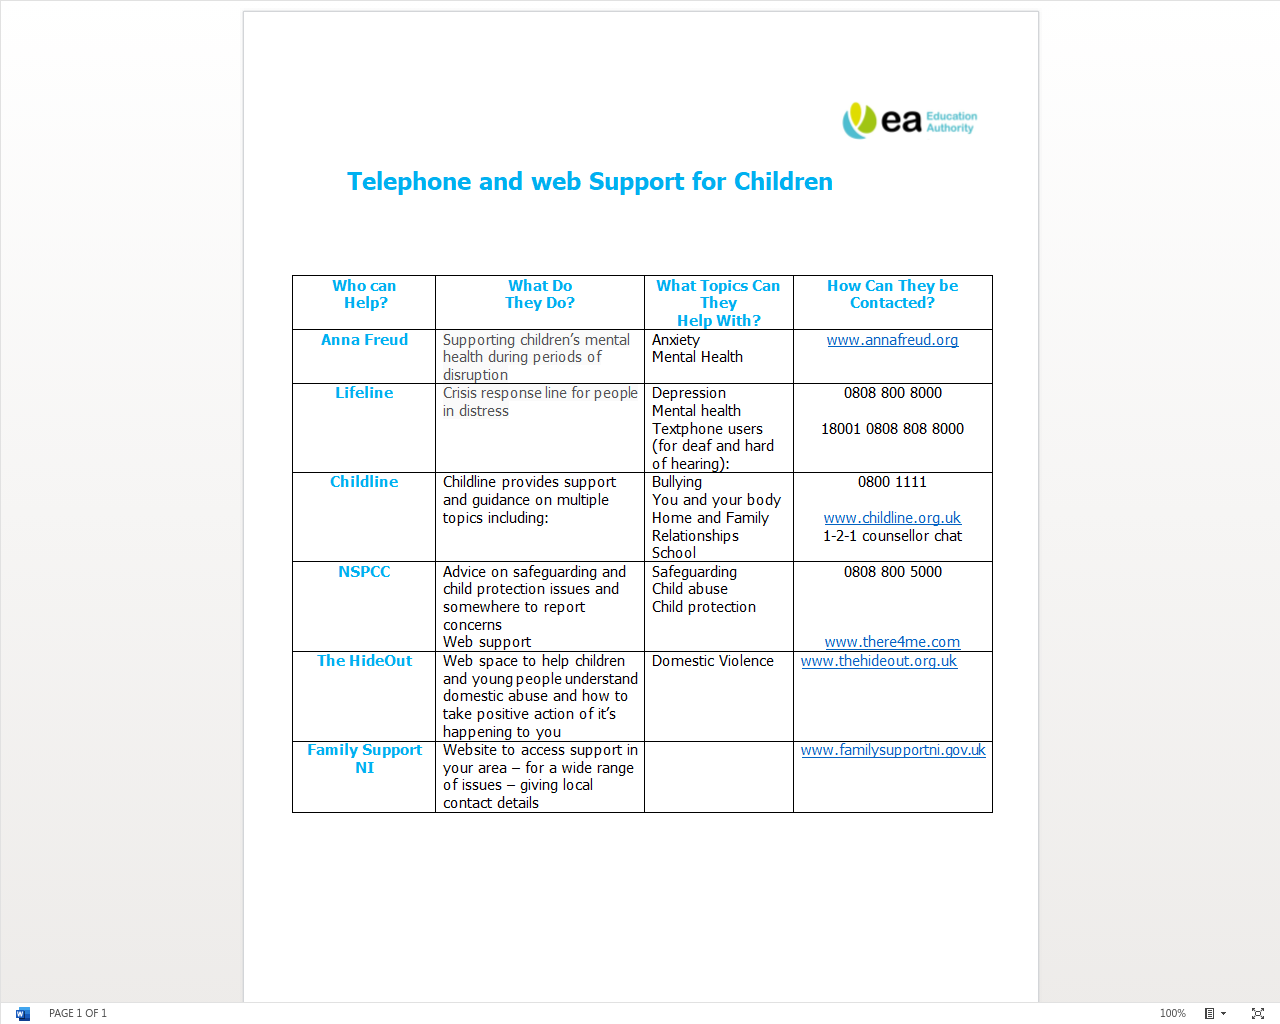 Telephone and Web Support for Children